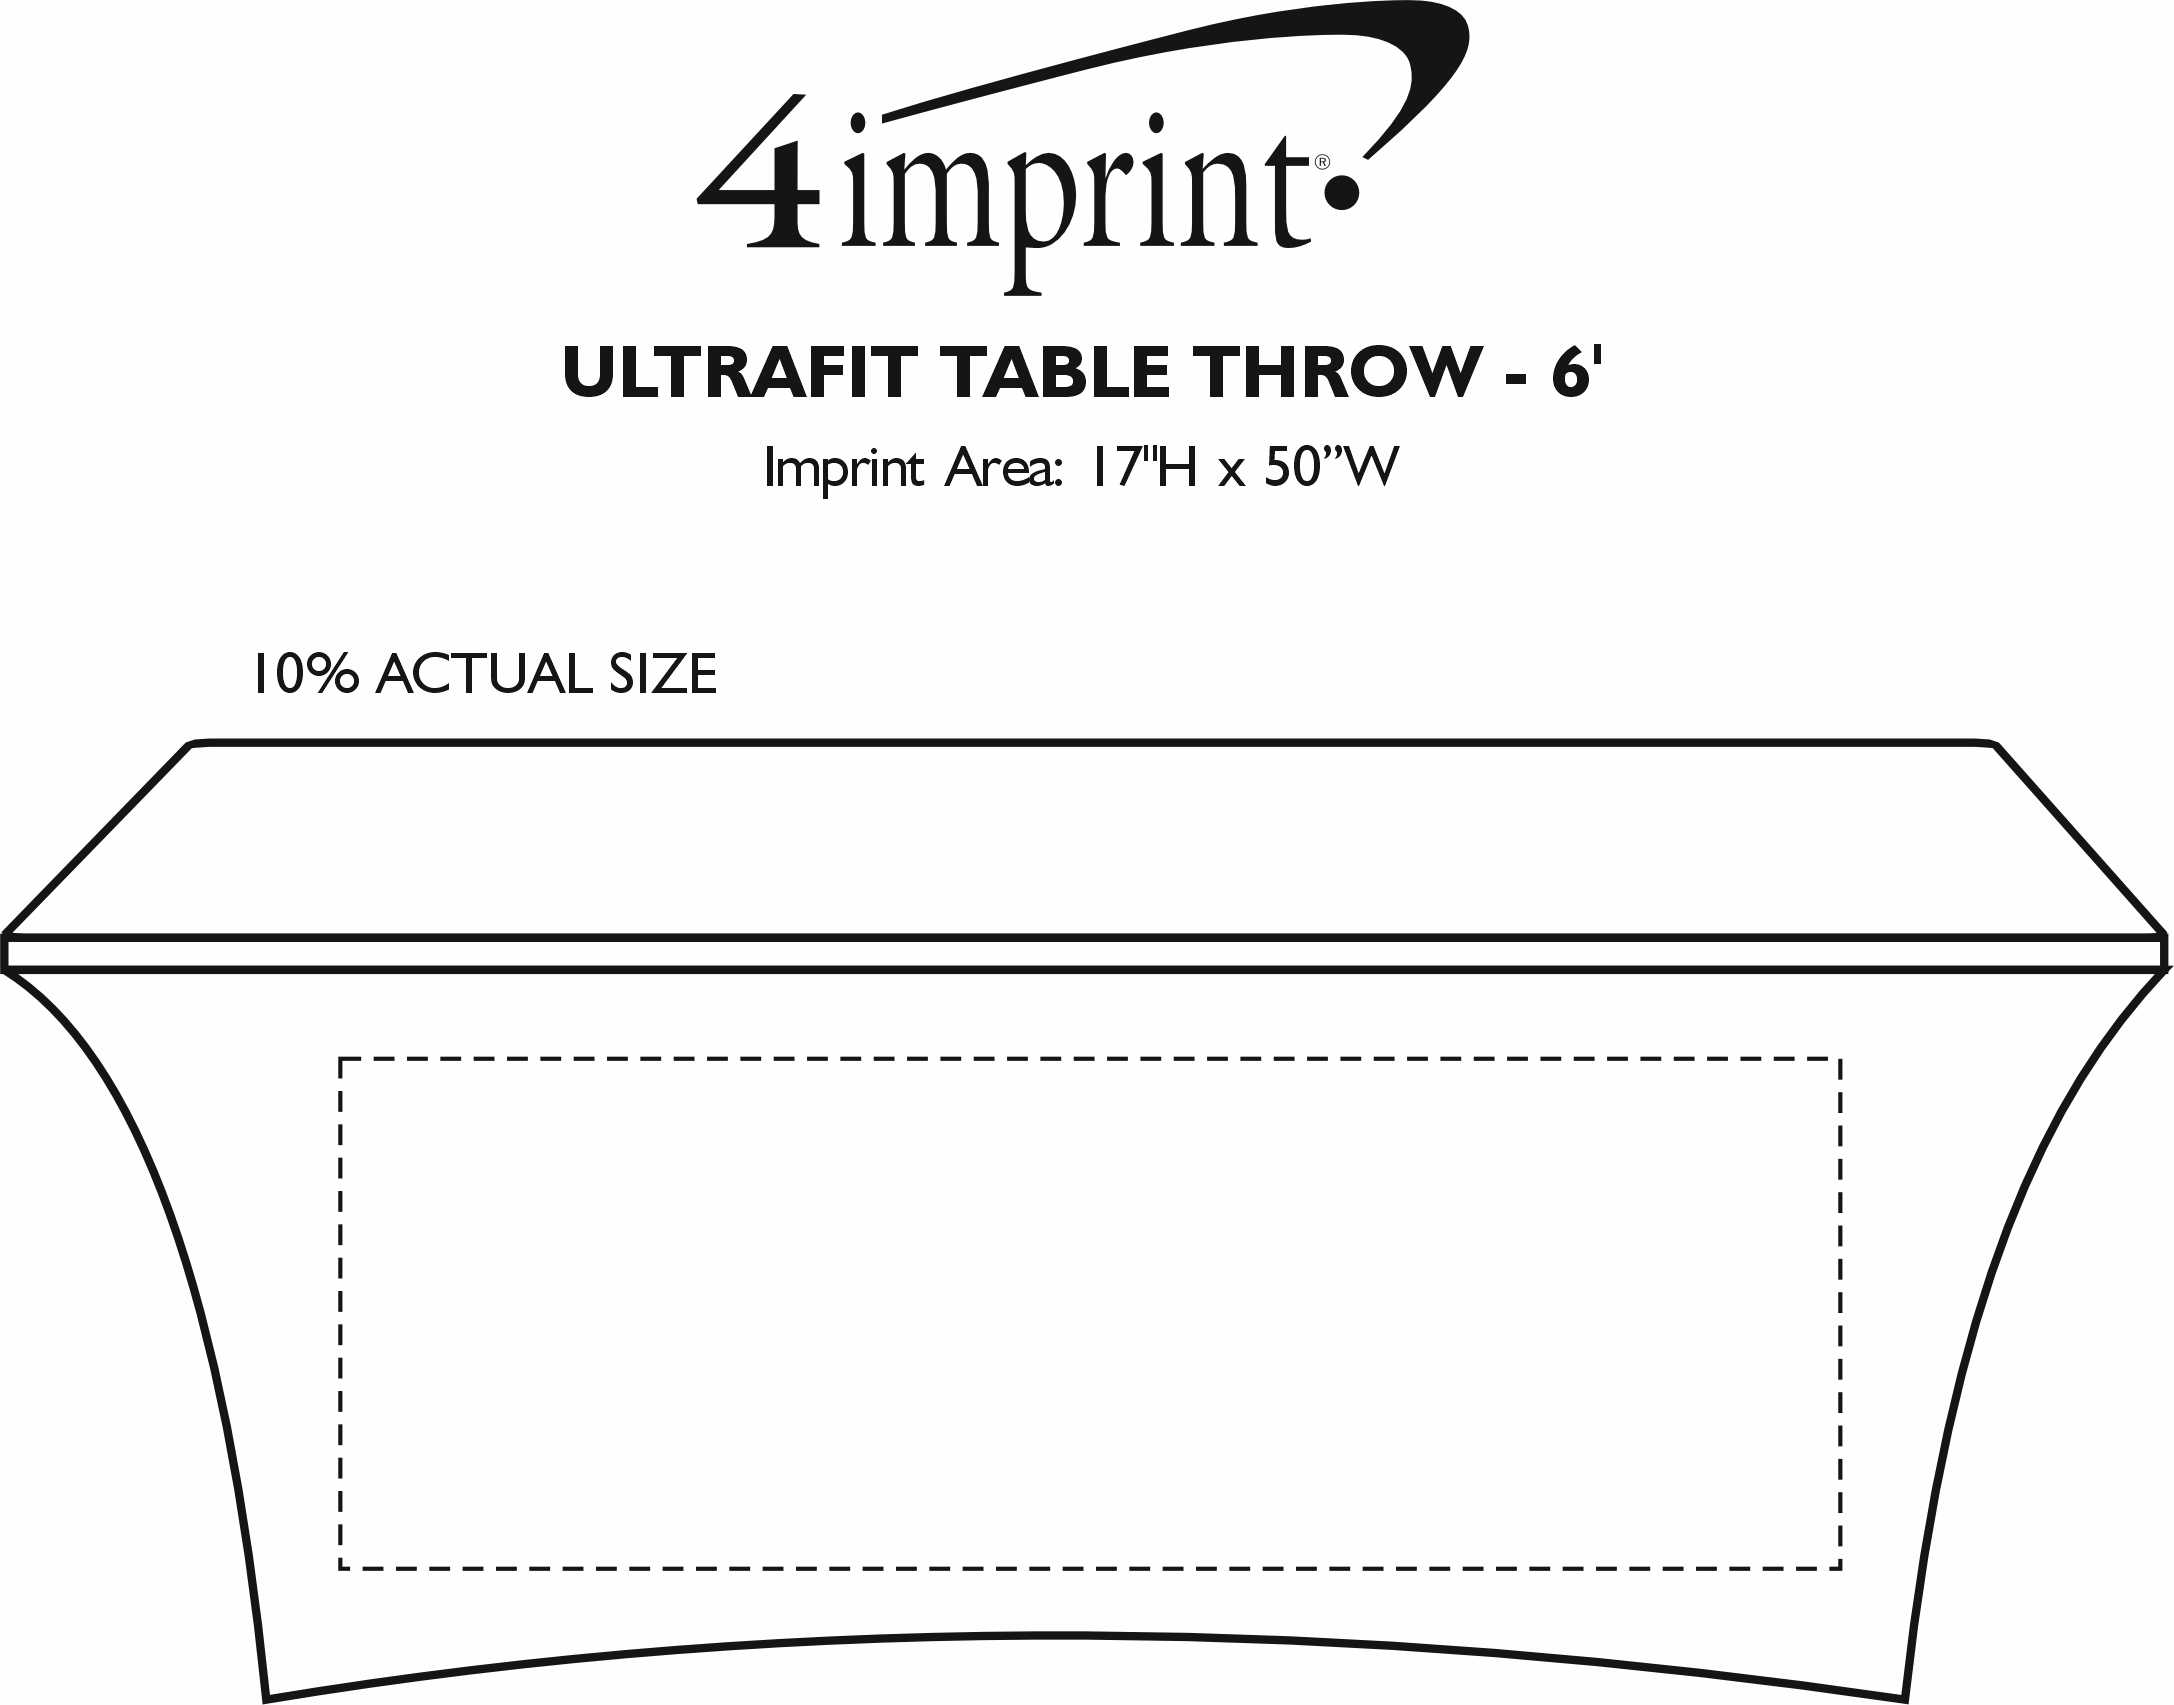 Imprint Area of Hemmed Closed-Back UltraFit Table Cover - 6'